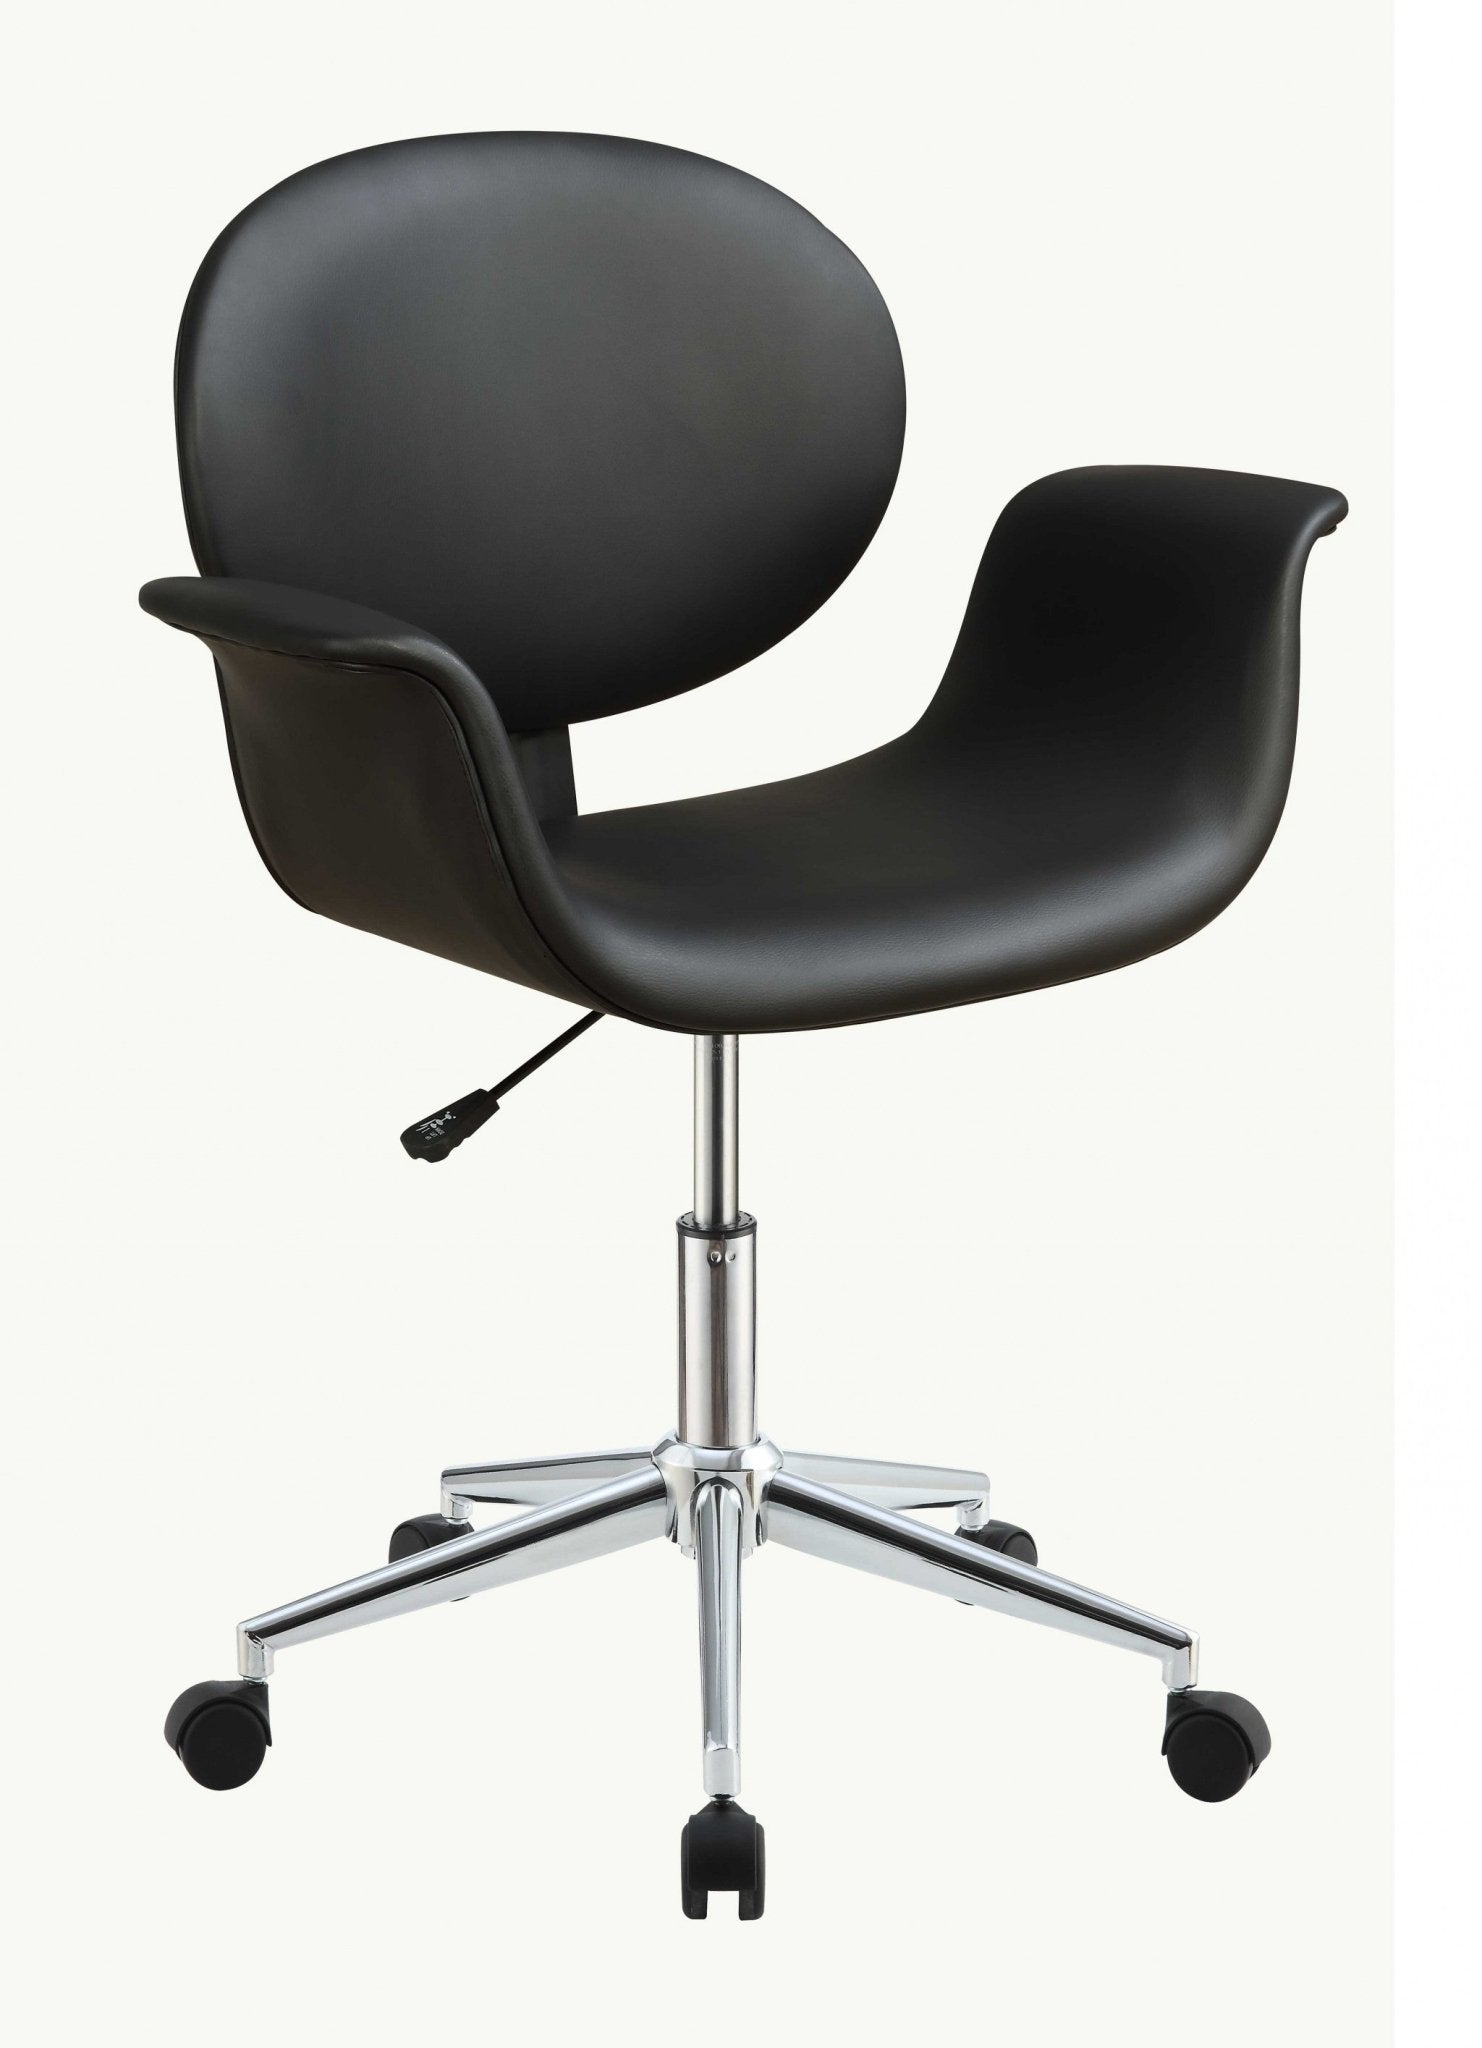 Black-Faux-Leather-Tufted-Seat-Swivel-Adjustable-Task-Chair-Leather-Back-Steel-Frame-Office-Chairs